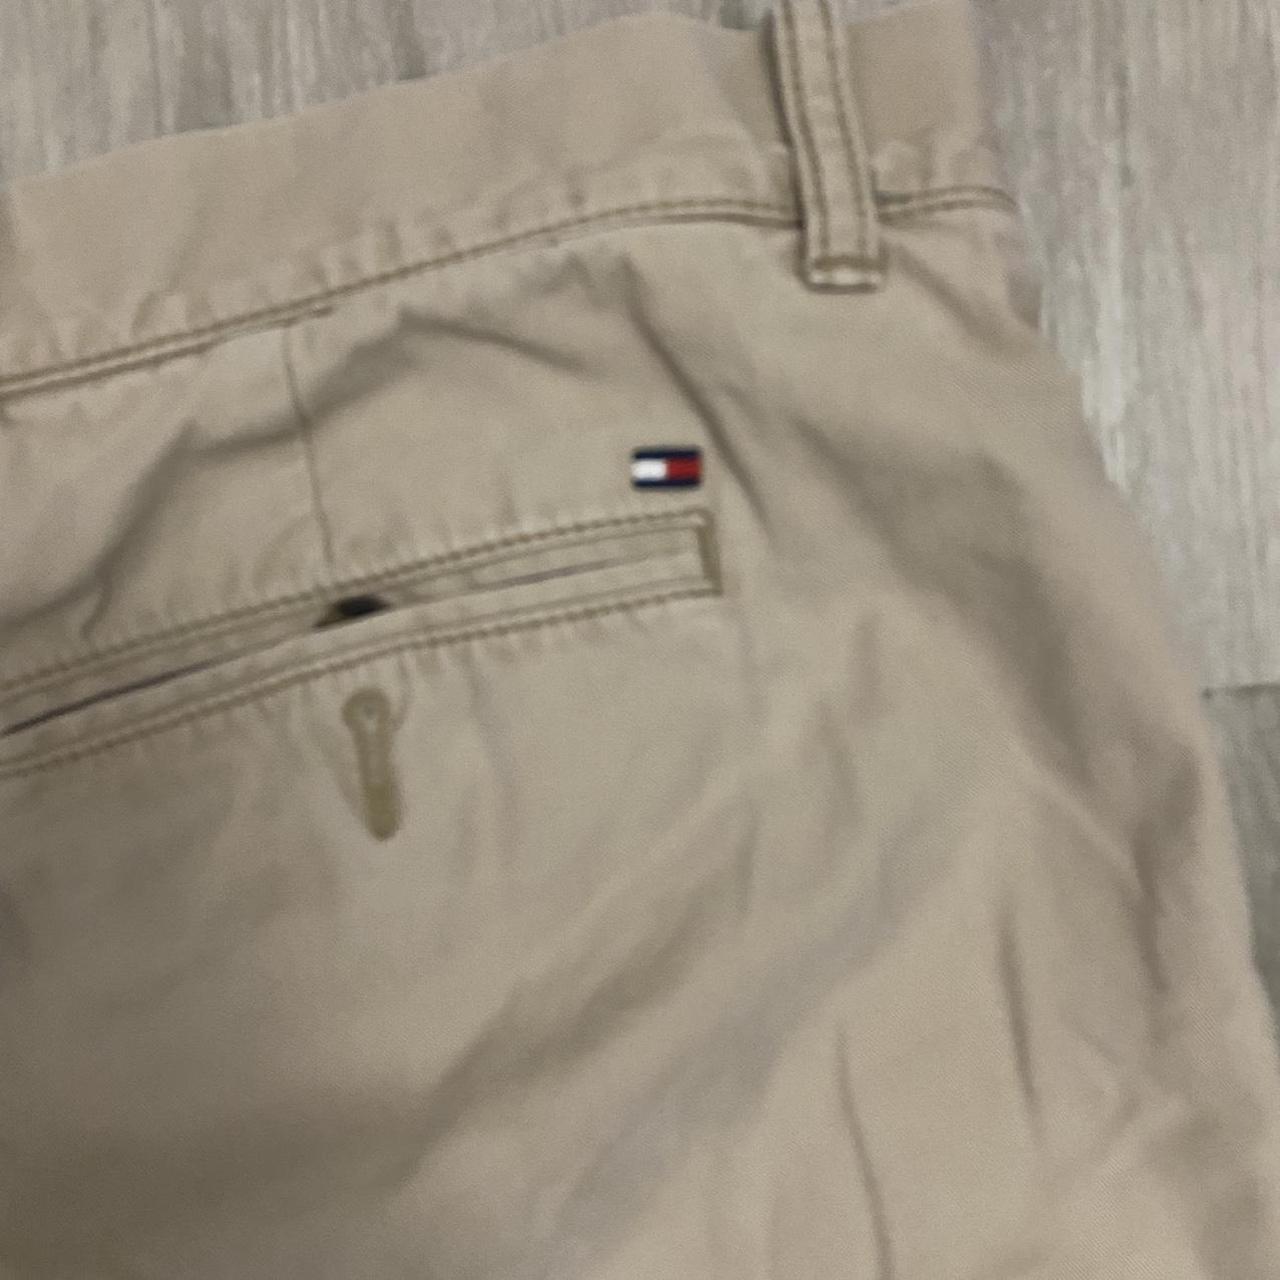 Product Image 2 - Vintage Tommy Hilfiger pants 36x30
In